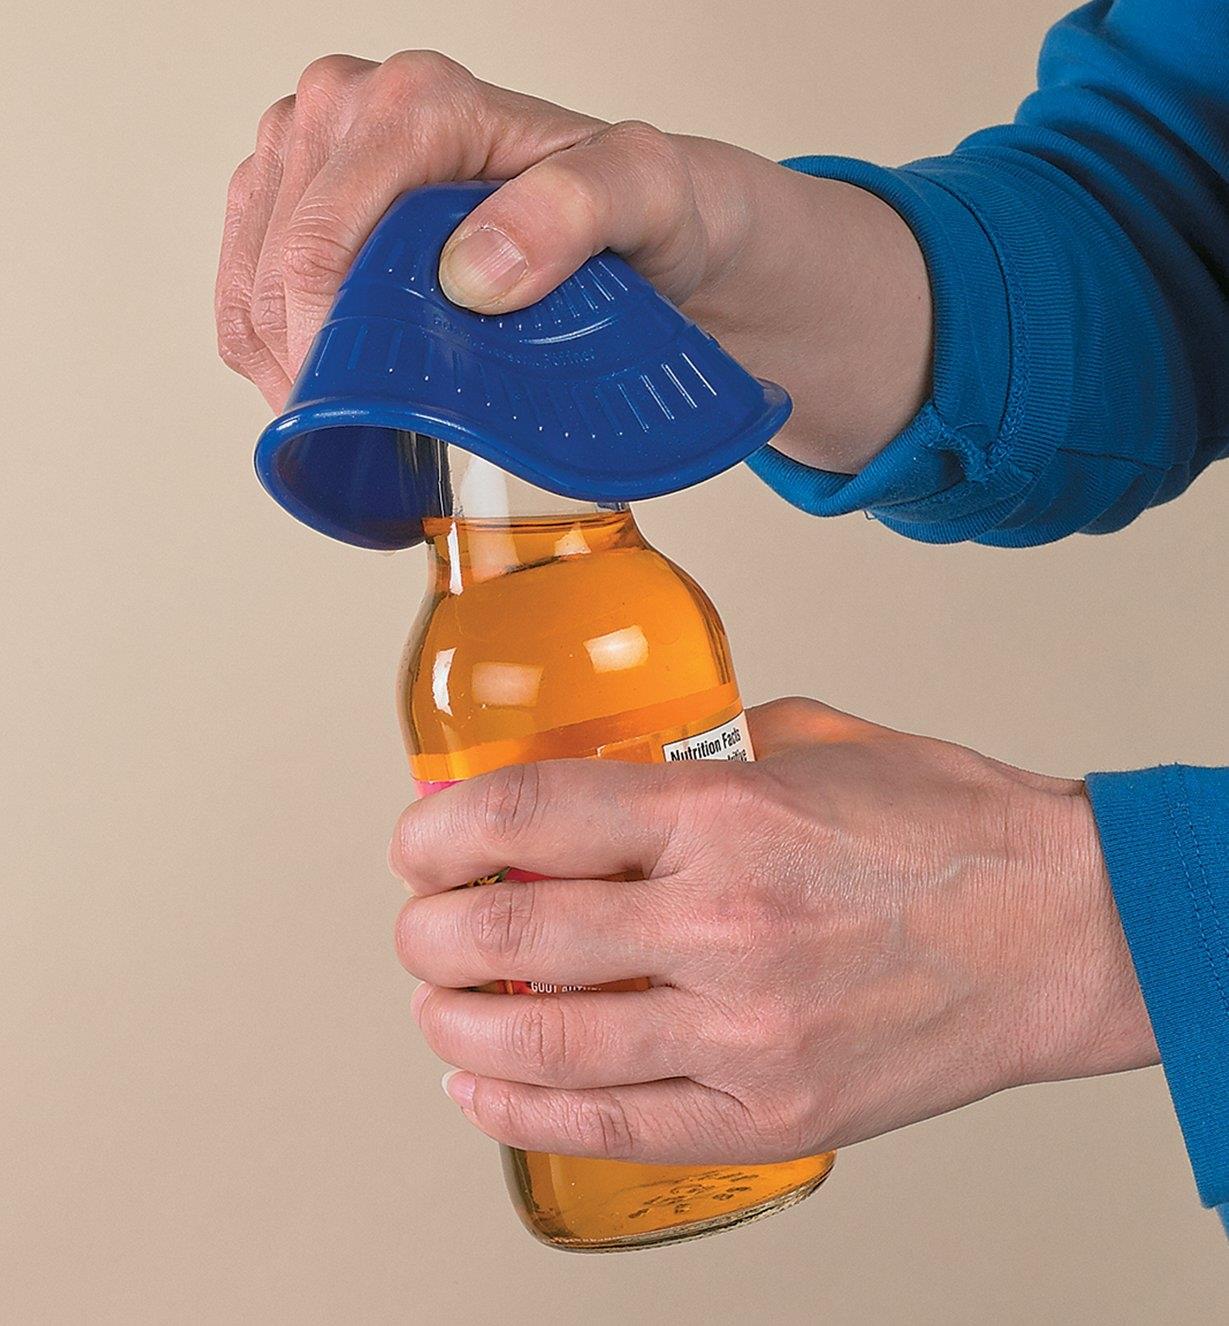 Using the Jar Opener to open a drink bottle